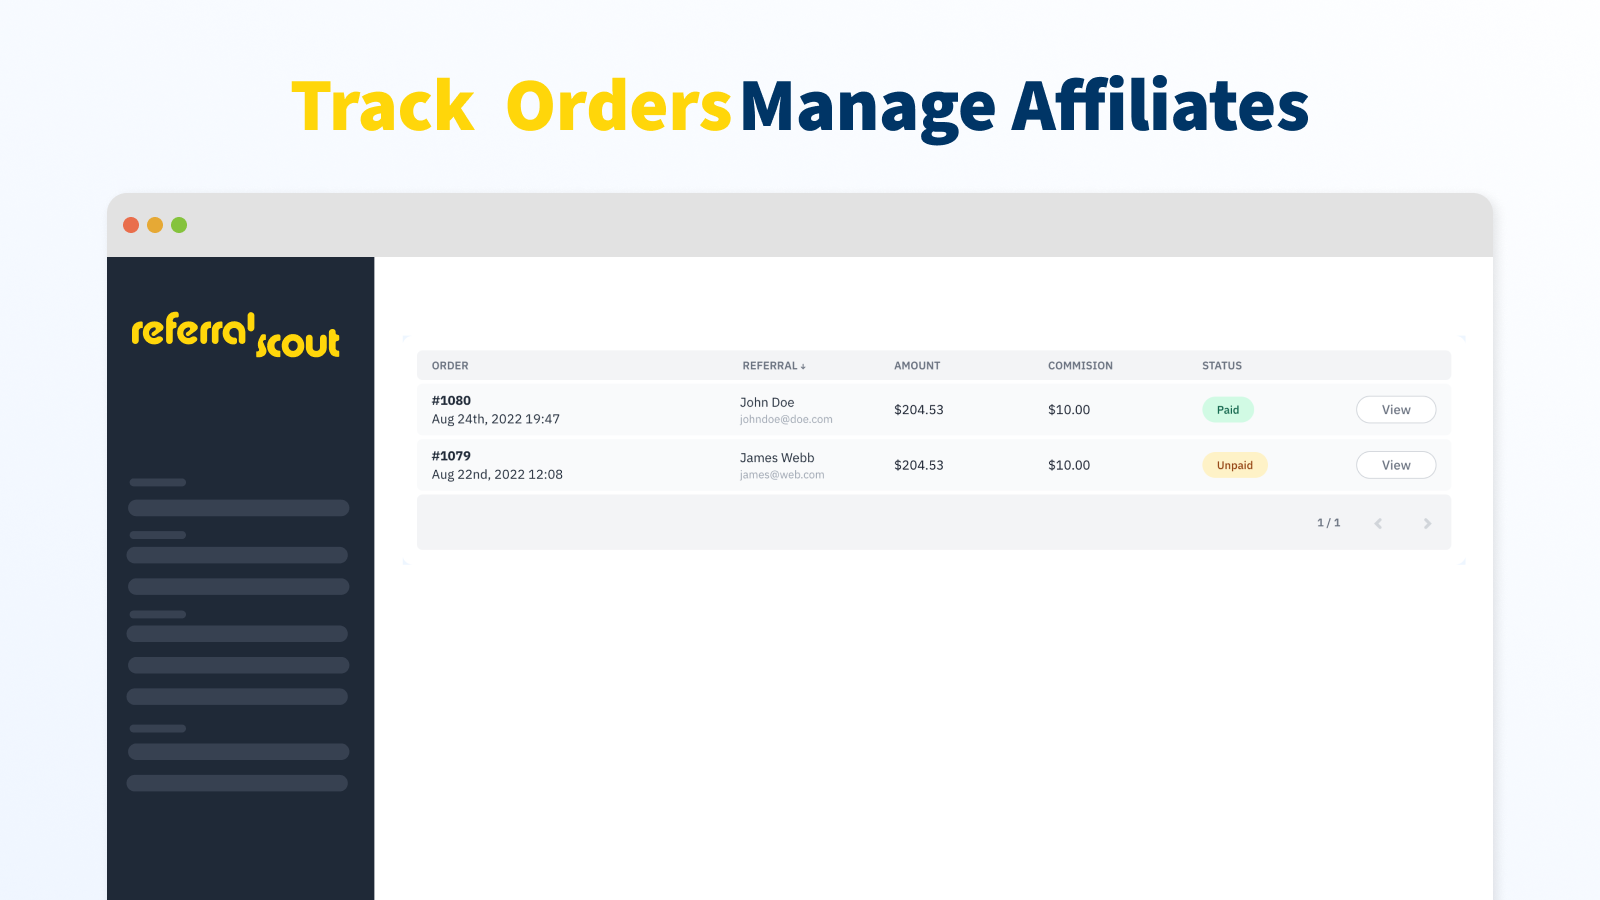 Track and Manage Affiliates